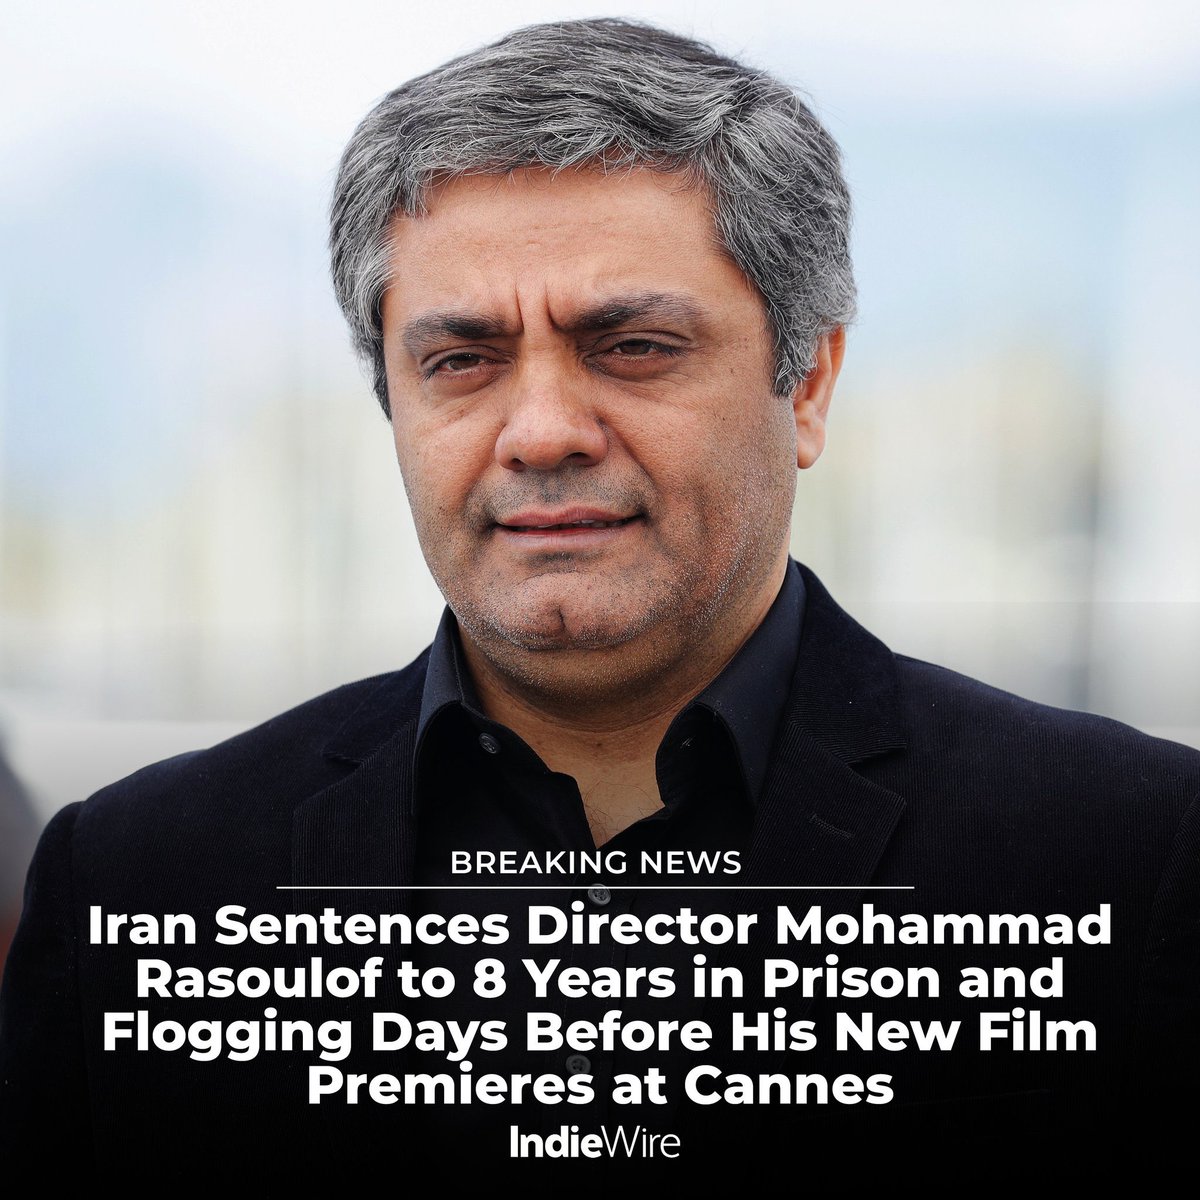 Horrified at the news of Iranian filmmaker Mohammad Rasoulof’s sentencing. One of the most thought-provoking and bravest voices in cinema.